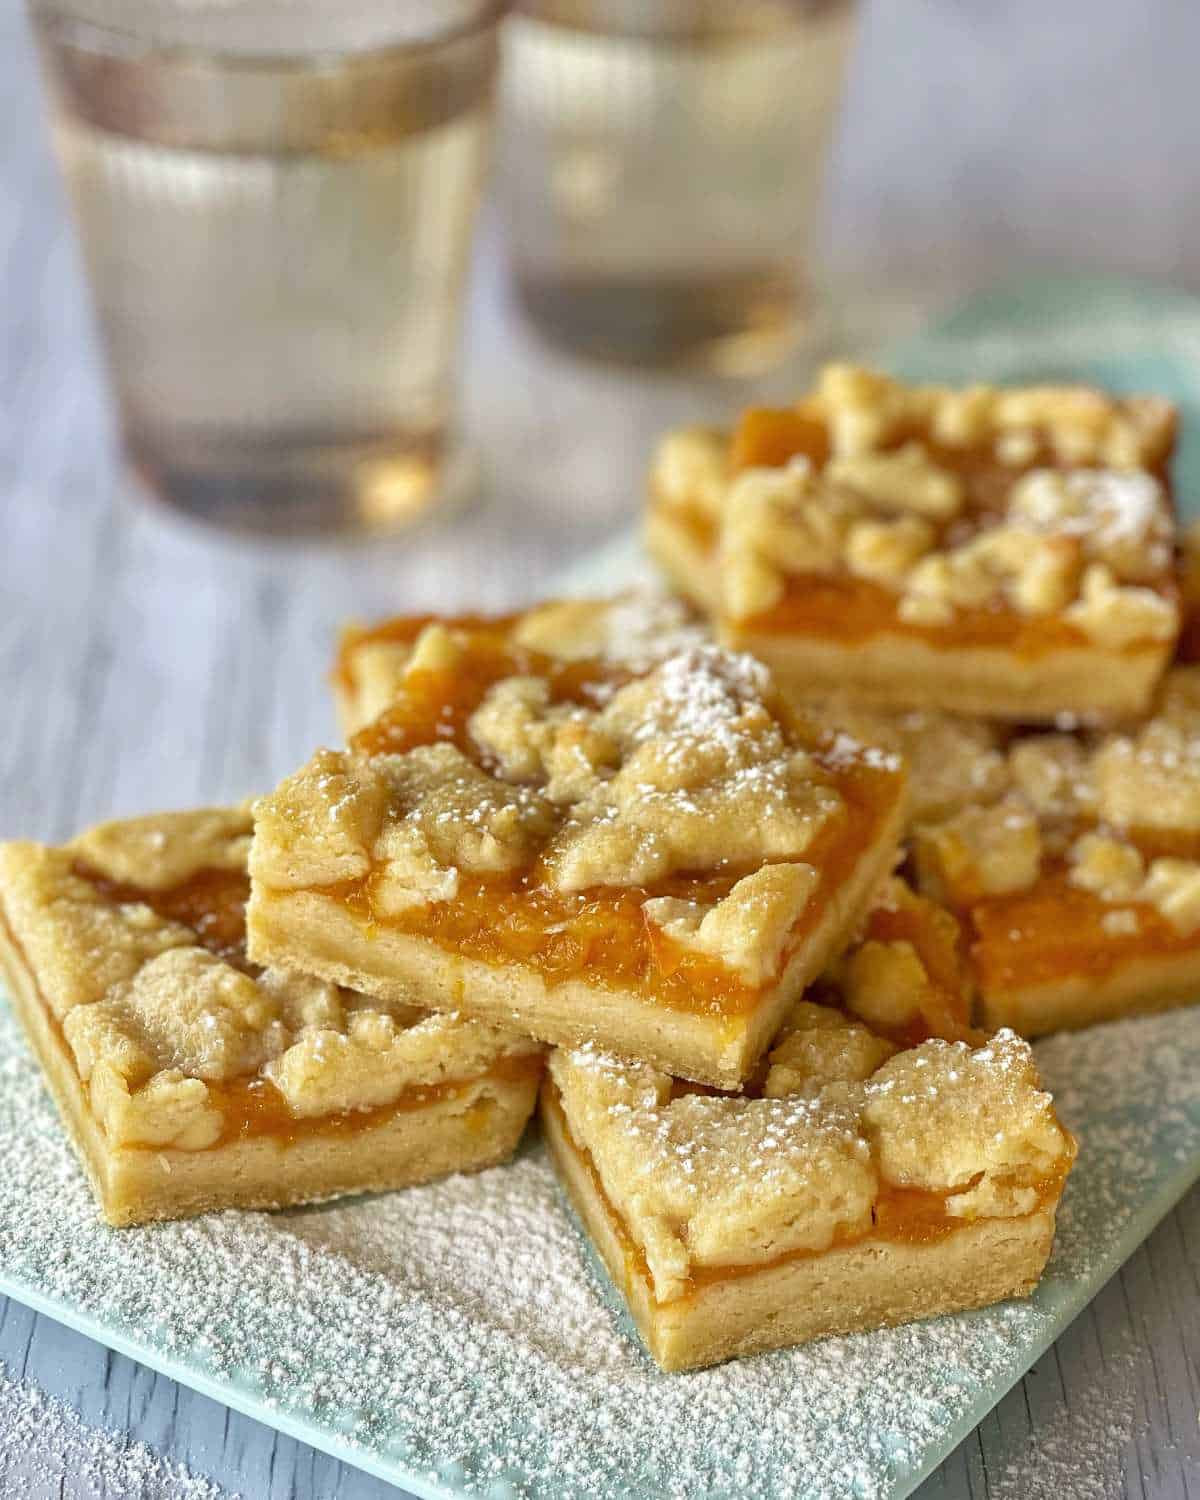 Baked Apricot Slice cut into pieces with a dusting of icing sugar.